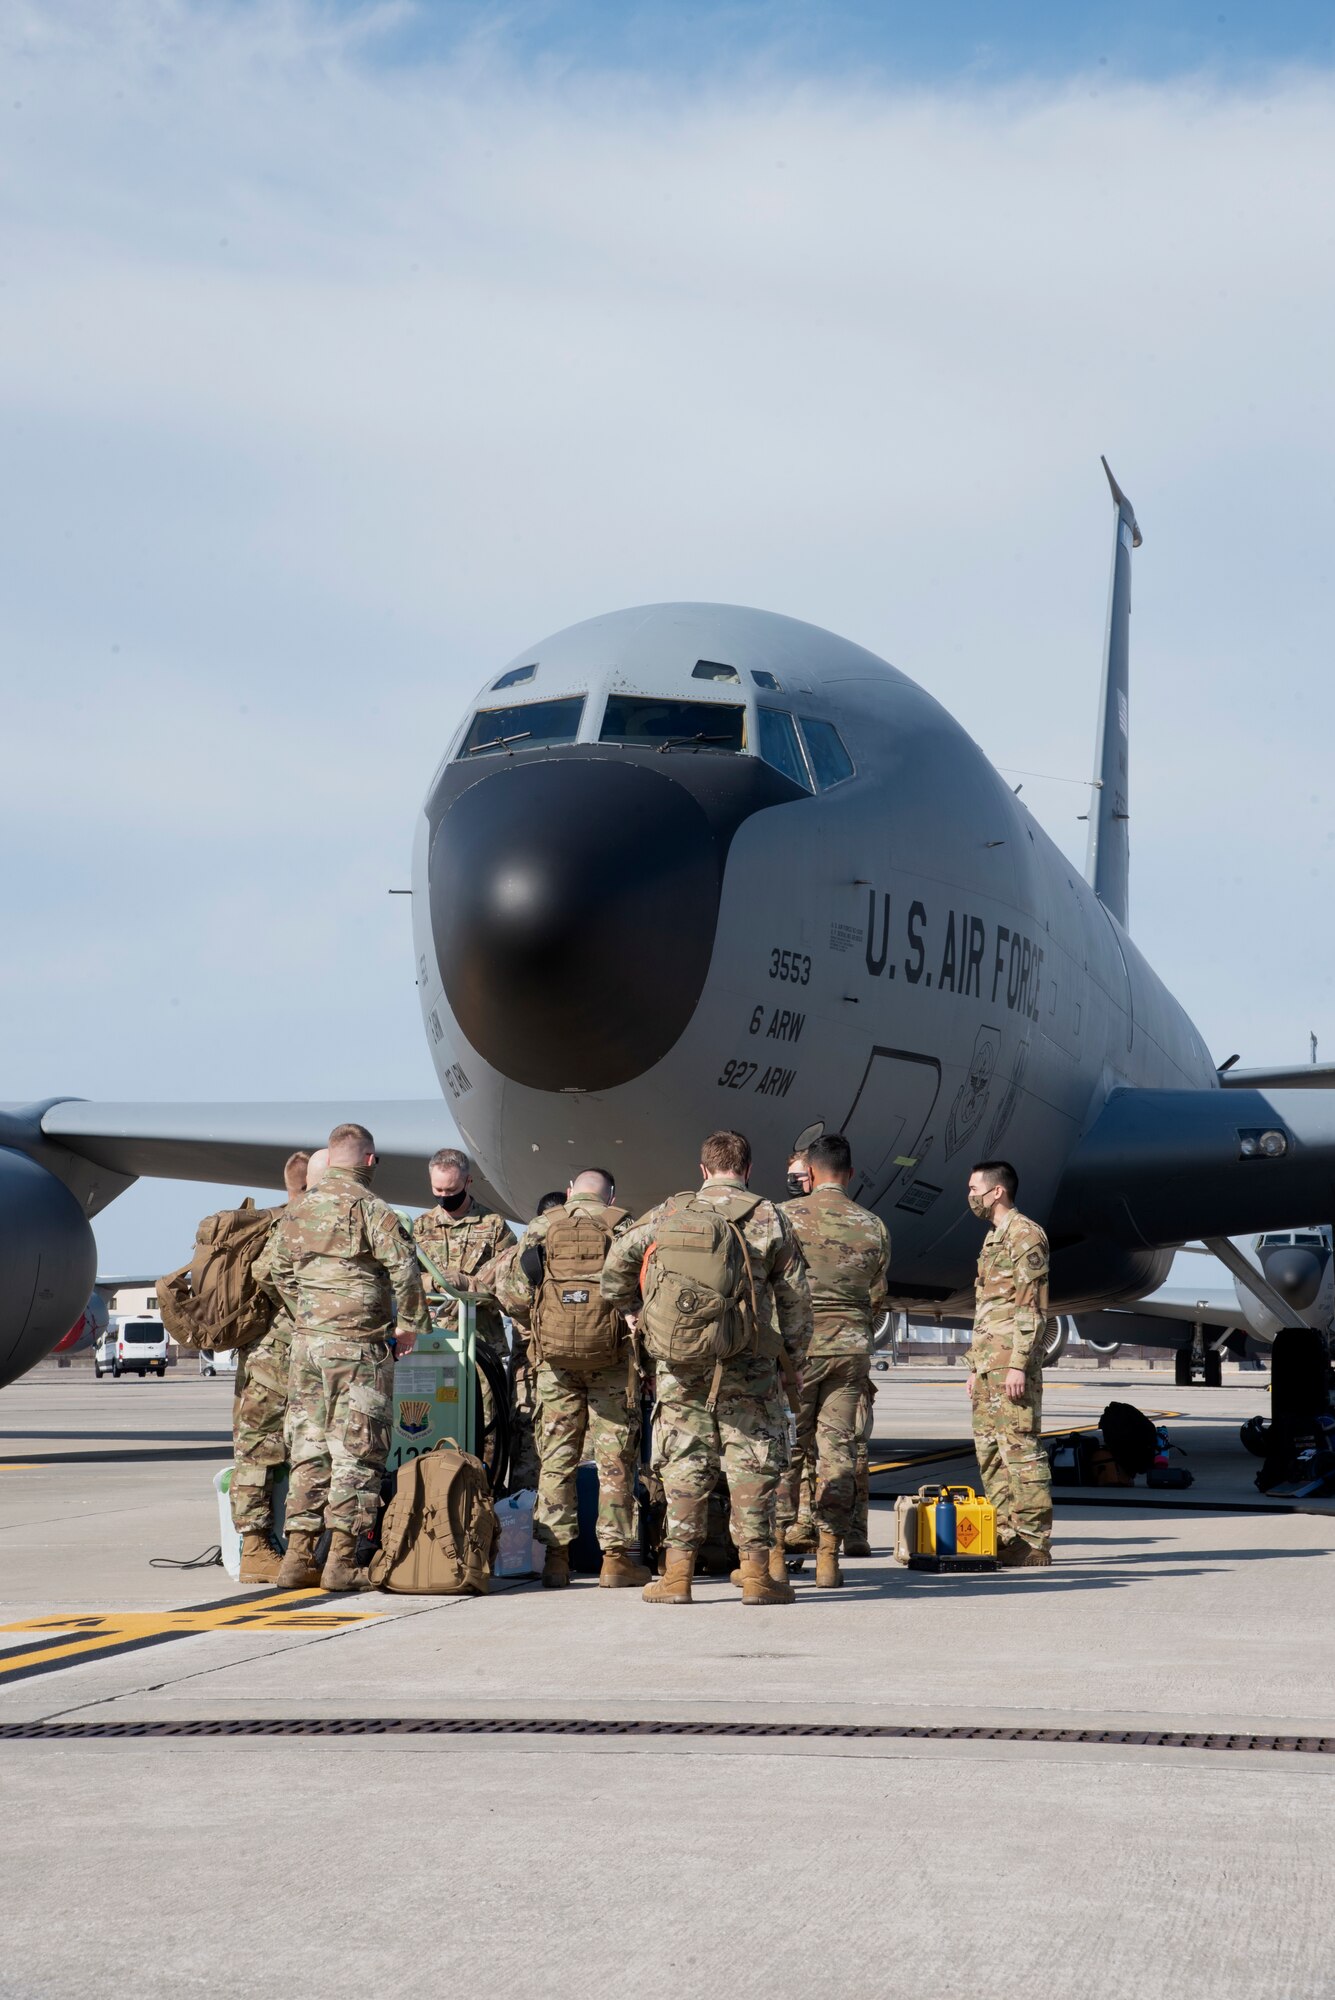 Team MacDill Airmen gather outside a KC-135 Stratotanker aircraft on the flight line, April 8, 2021 at MacDill Air Force Base, Fla.